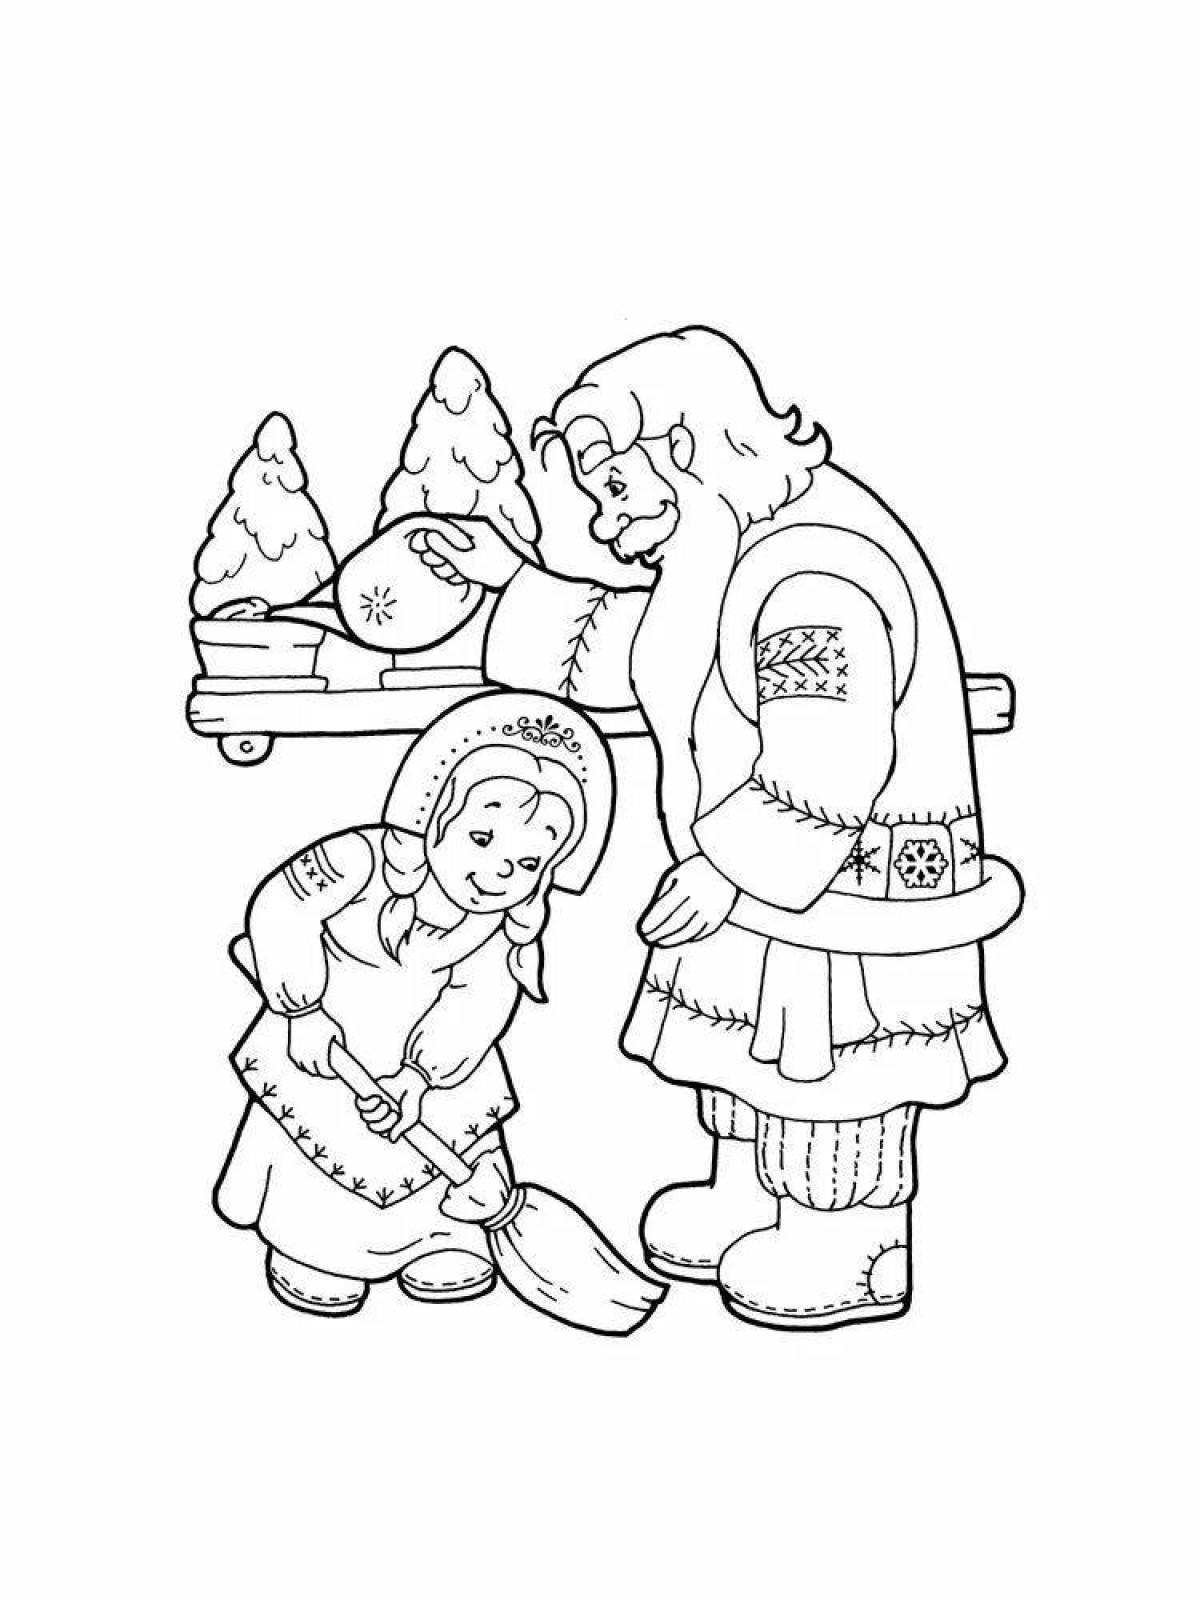 Coloring page beautiful needlewoman and sloth